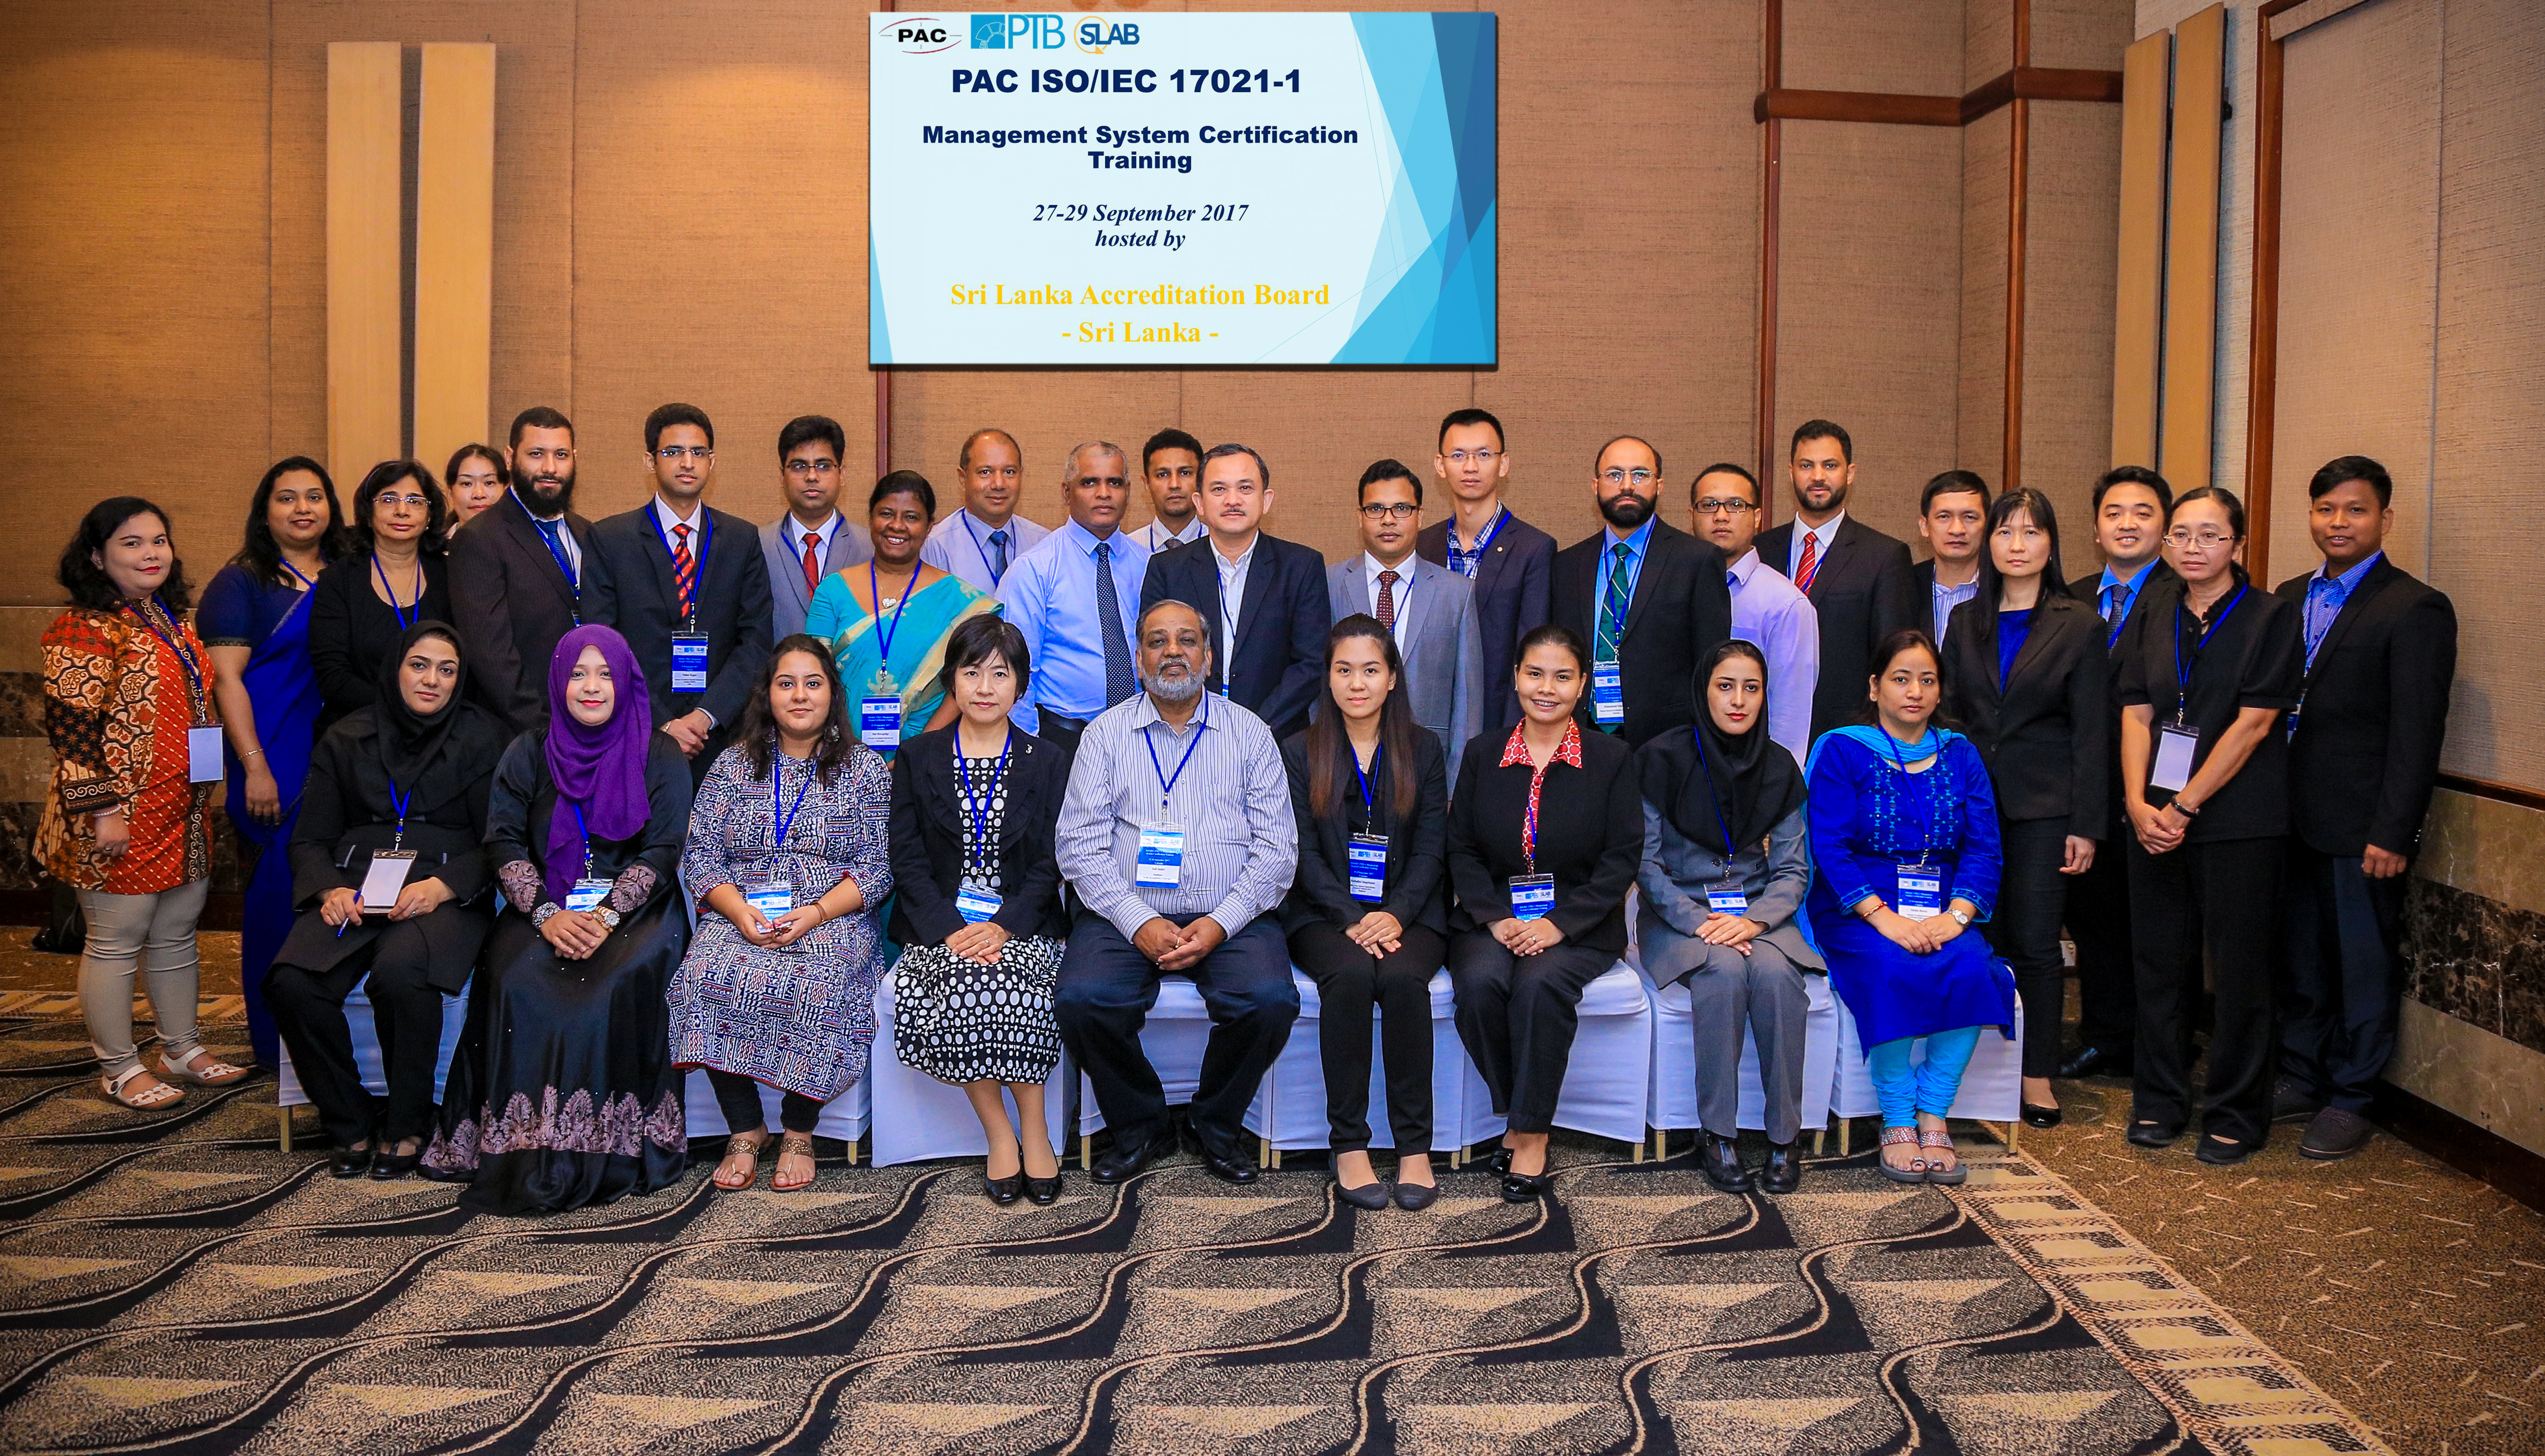 Training on ISO/IEC 17021-1:2015 by PAC and SLAB